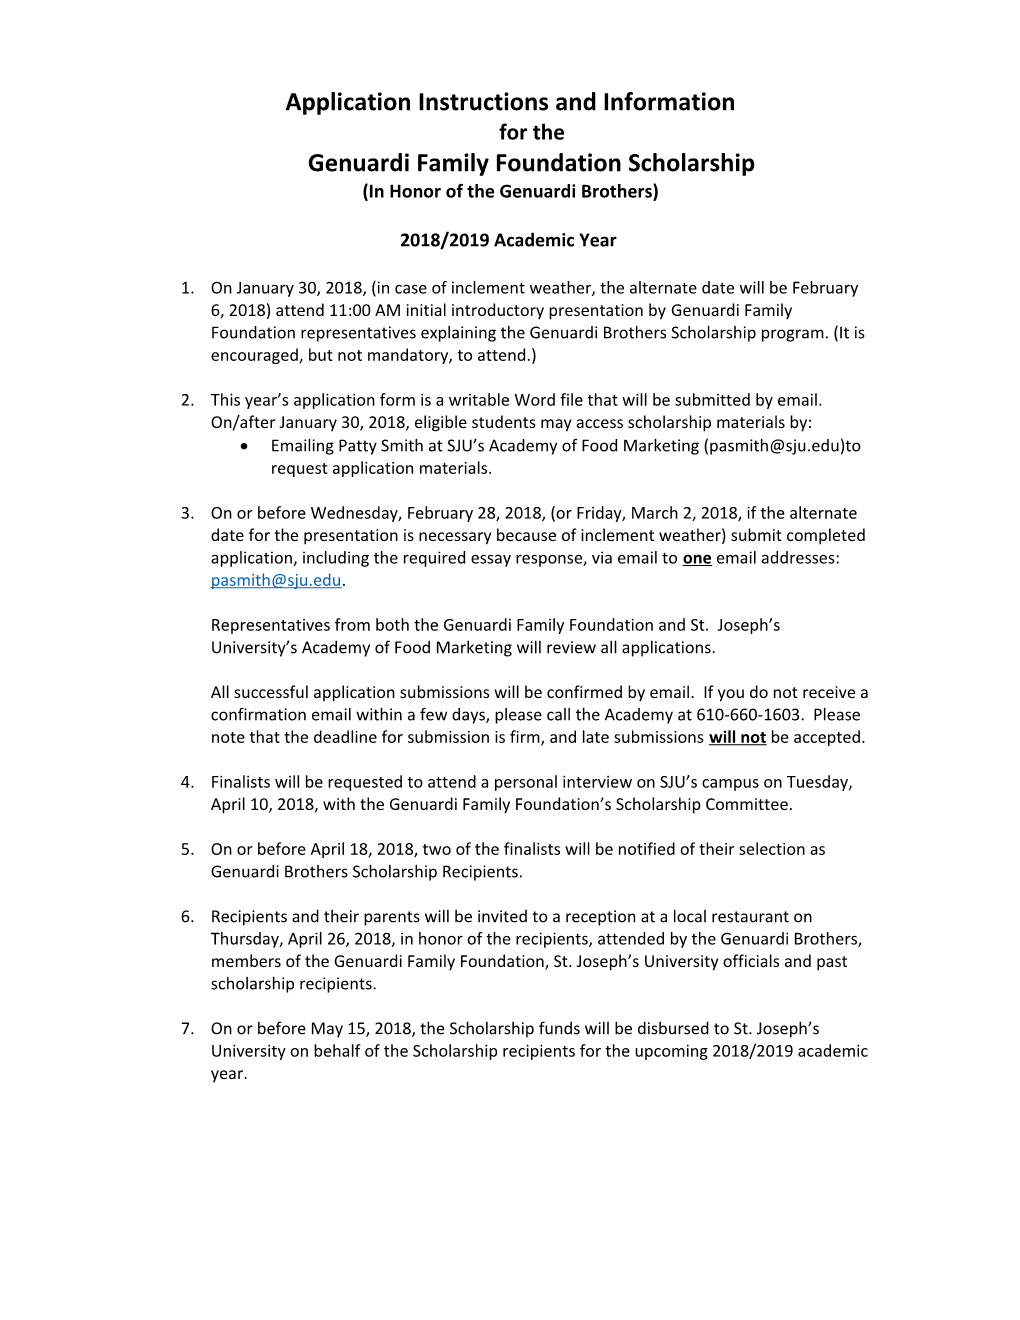 Application Instructions and Information for Genuardi Brothers Scholarship